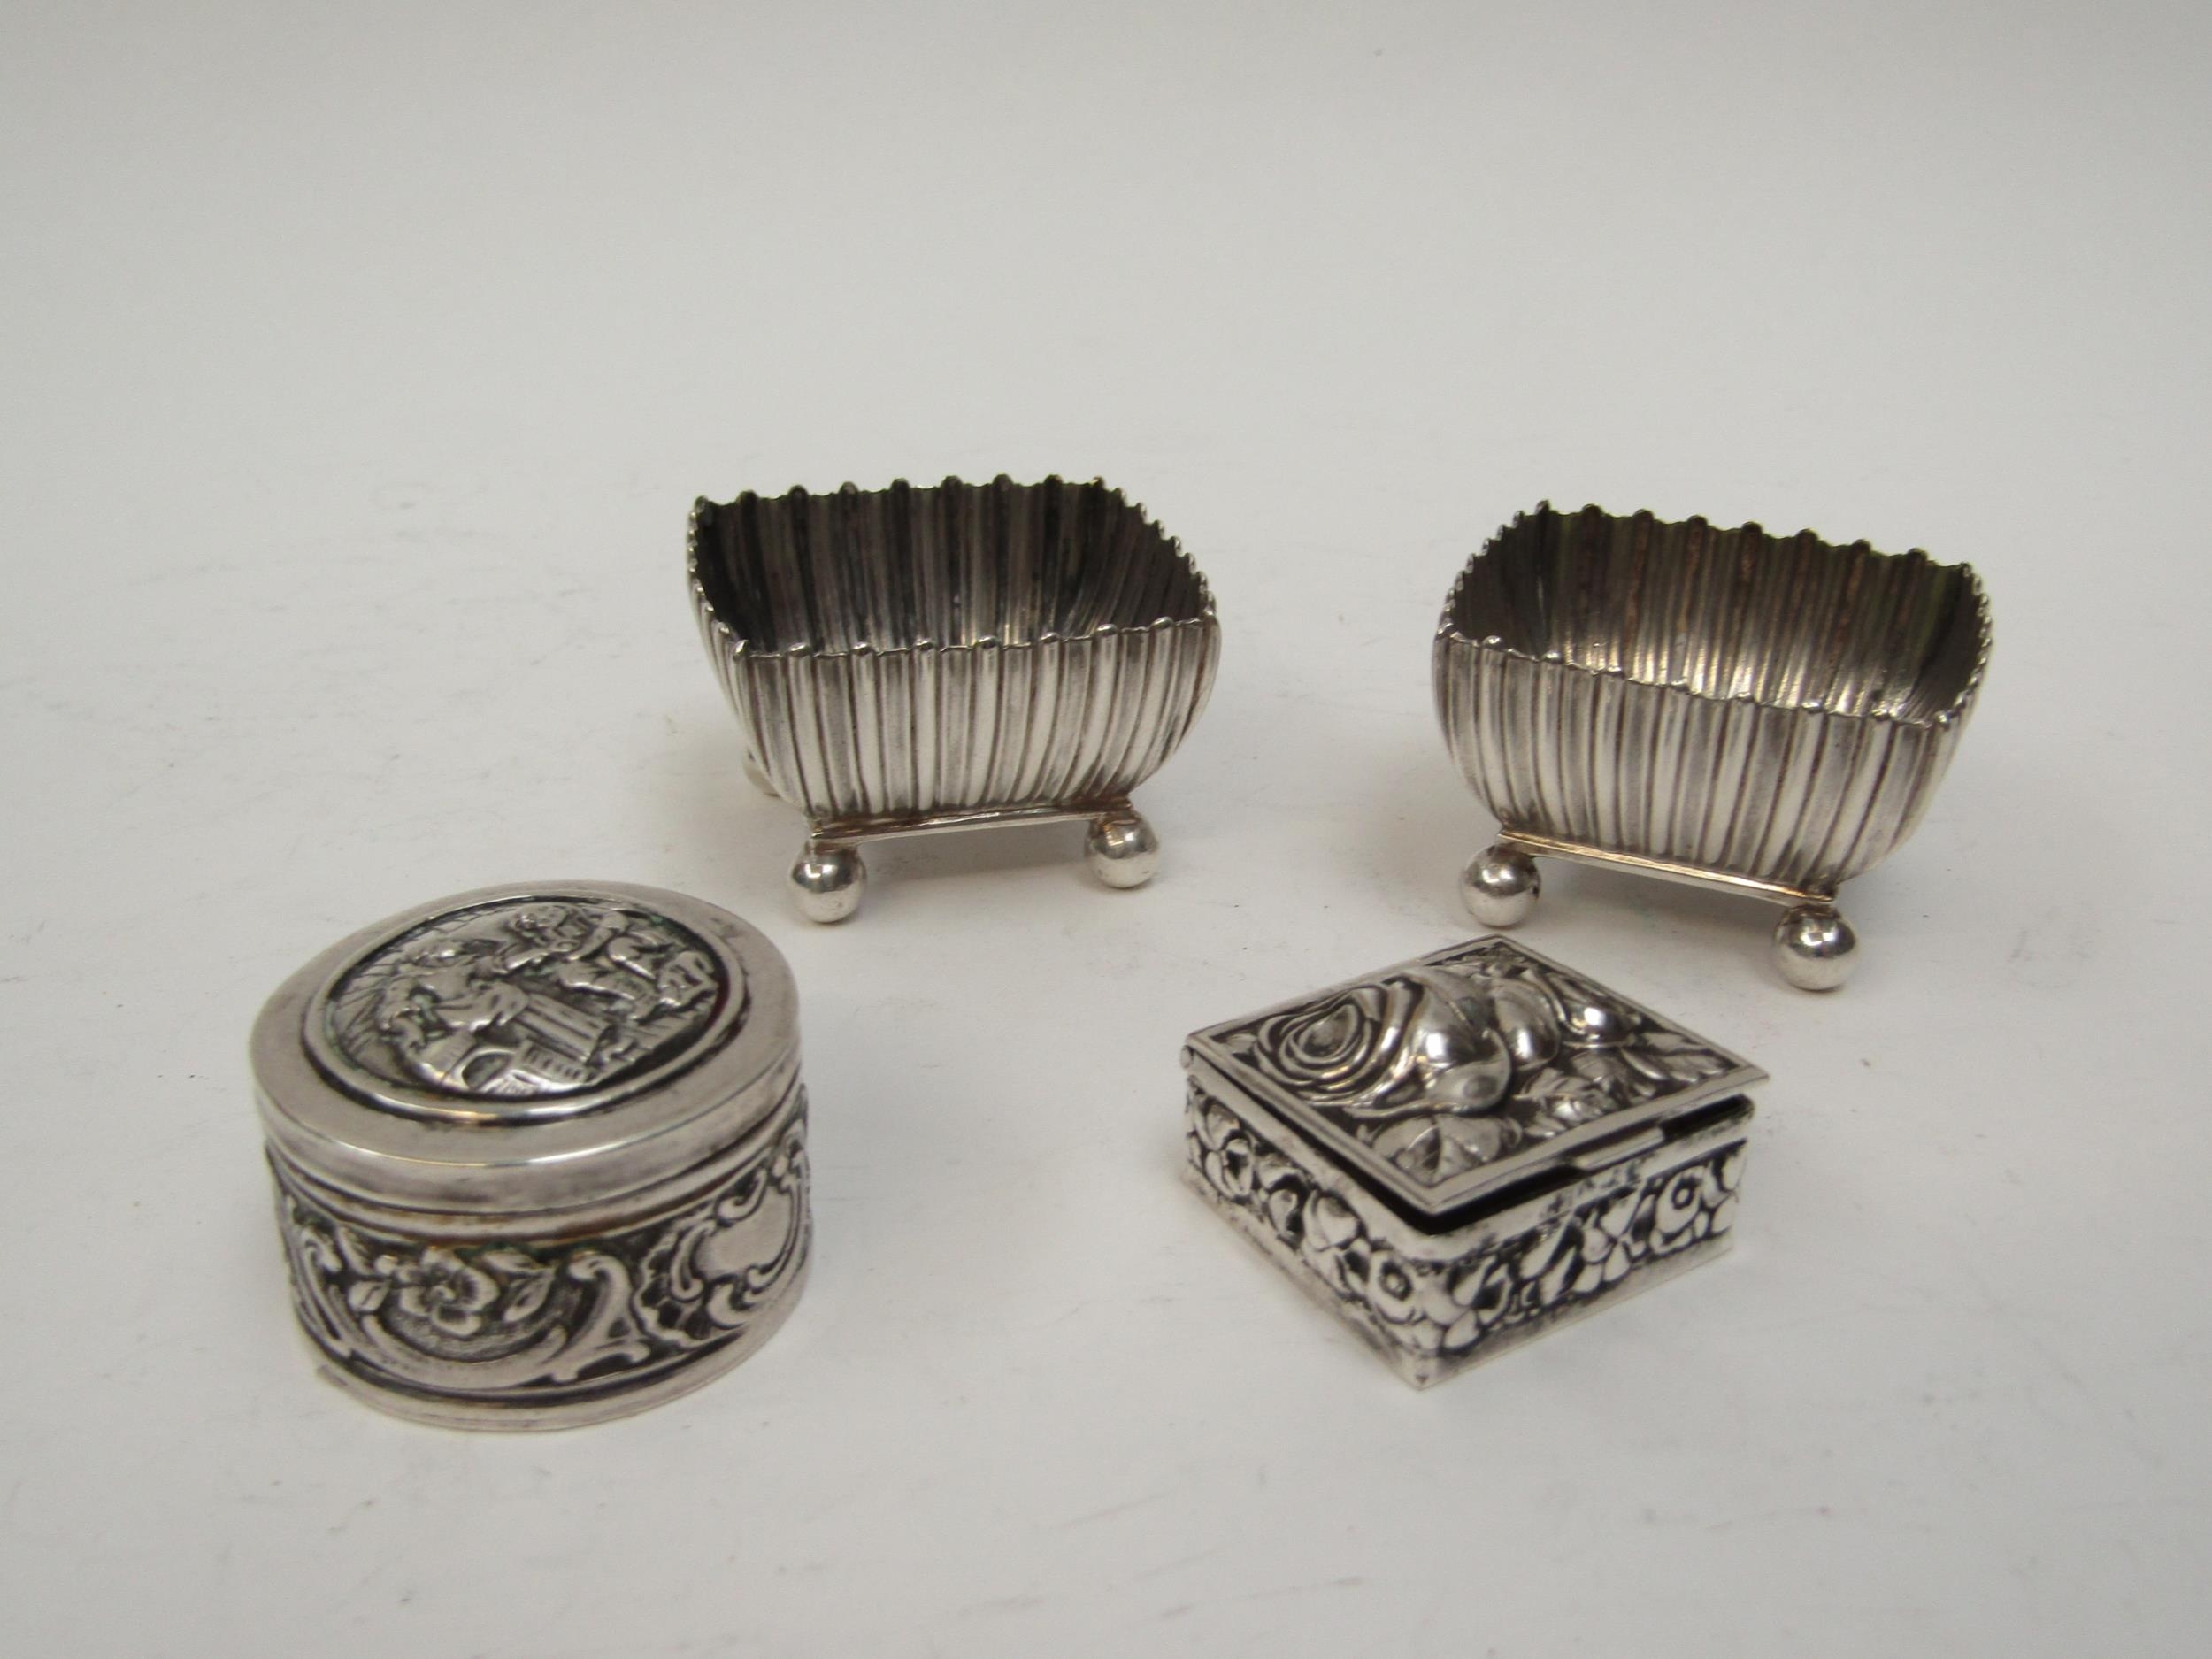 A pair of Goldsmiths & Silversmiths Co. (William Gibson & John Lawrence Langman) silver salts with